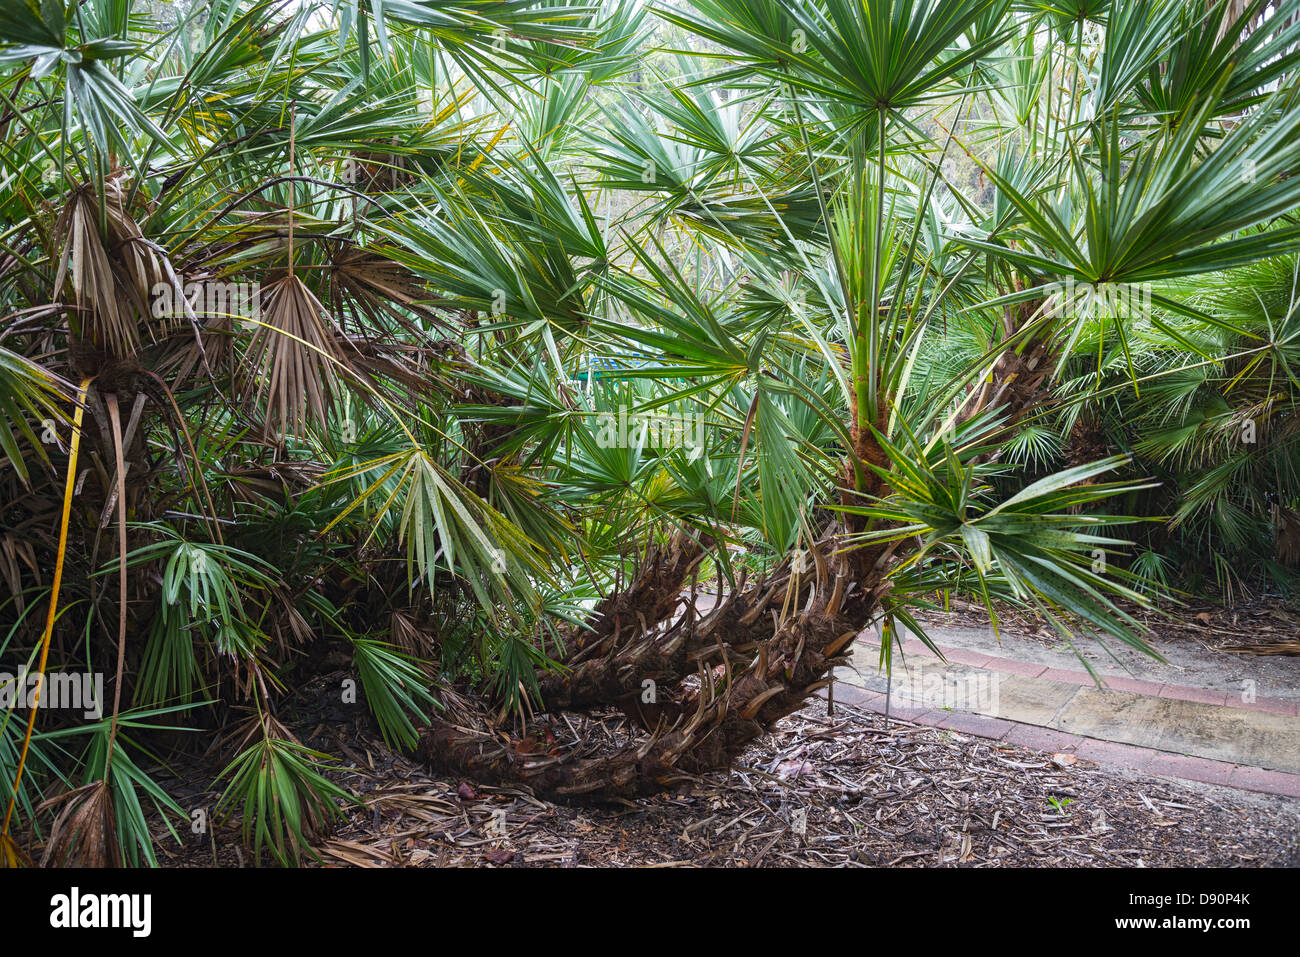 The saw palmetto or Serenoa repens often forms a dense thicket or understory in Florida and the Southeastern U.S. Stock Photo